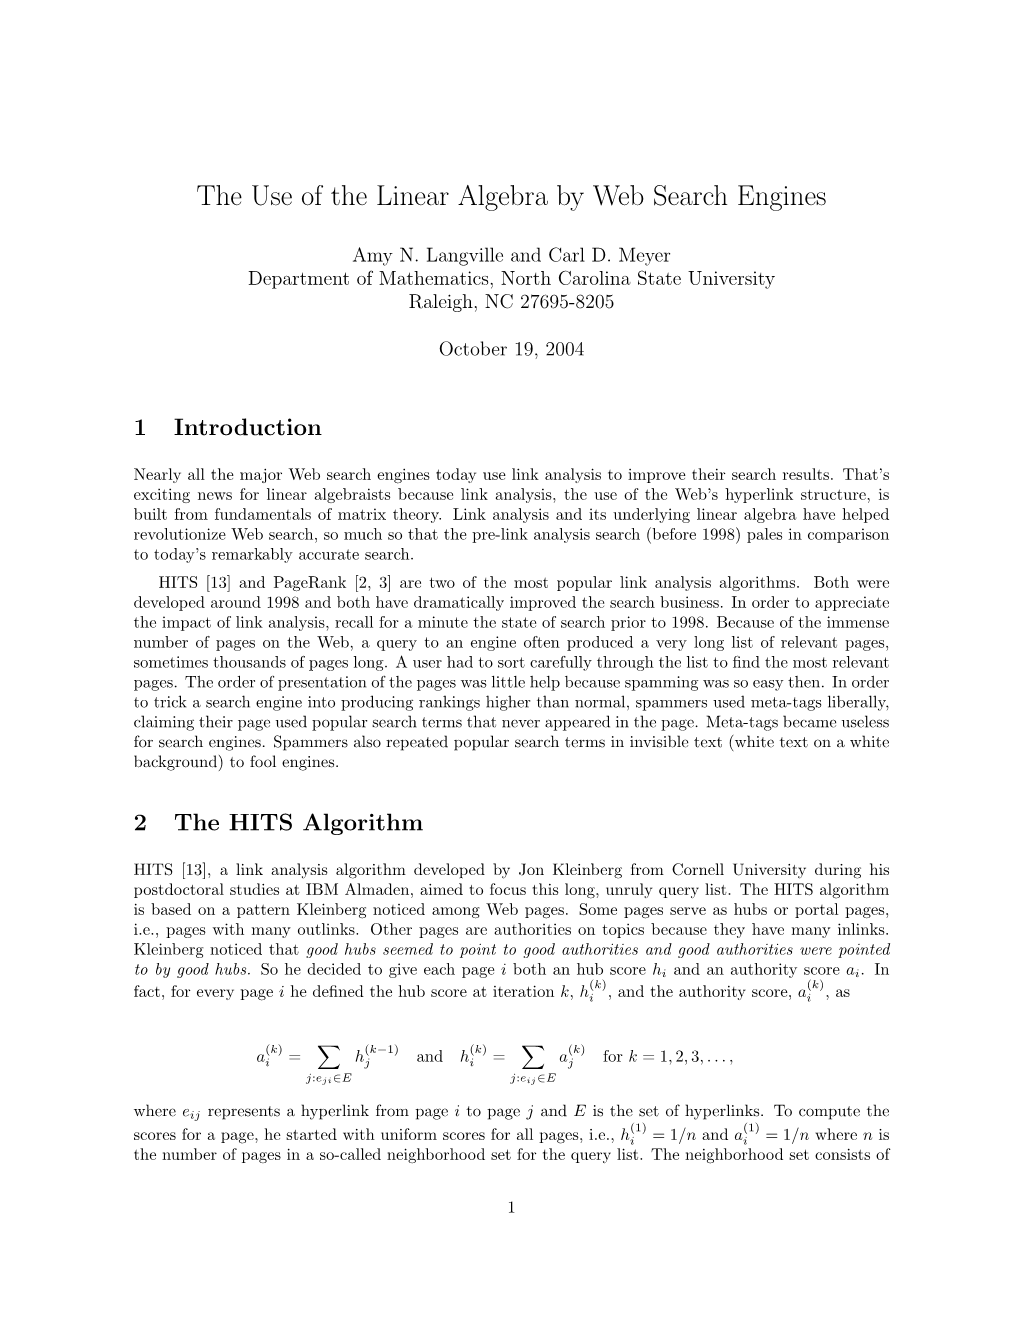 The Use of the Linear Algebra by Web Search Engines